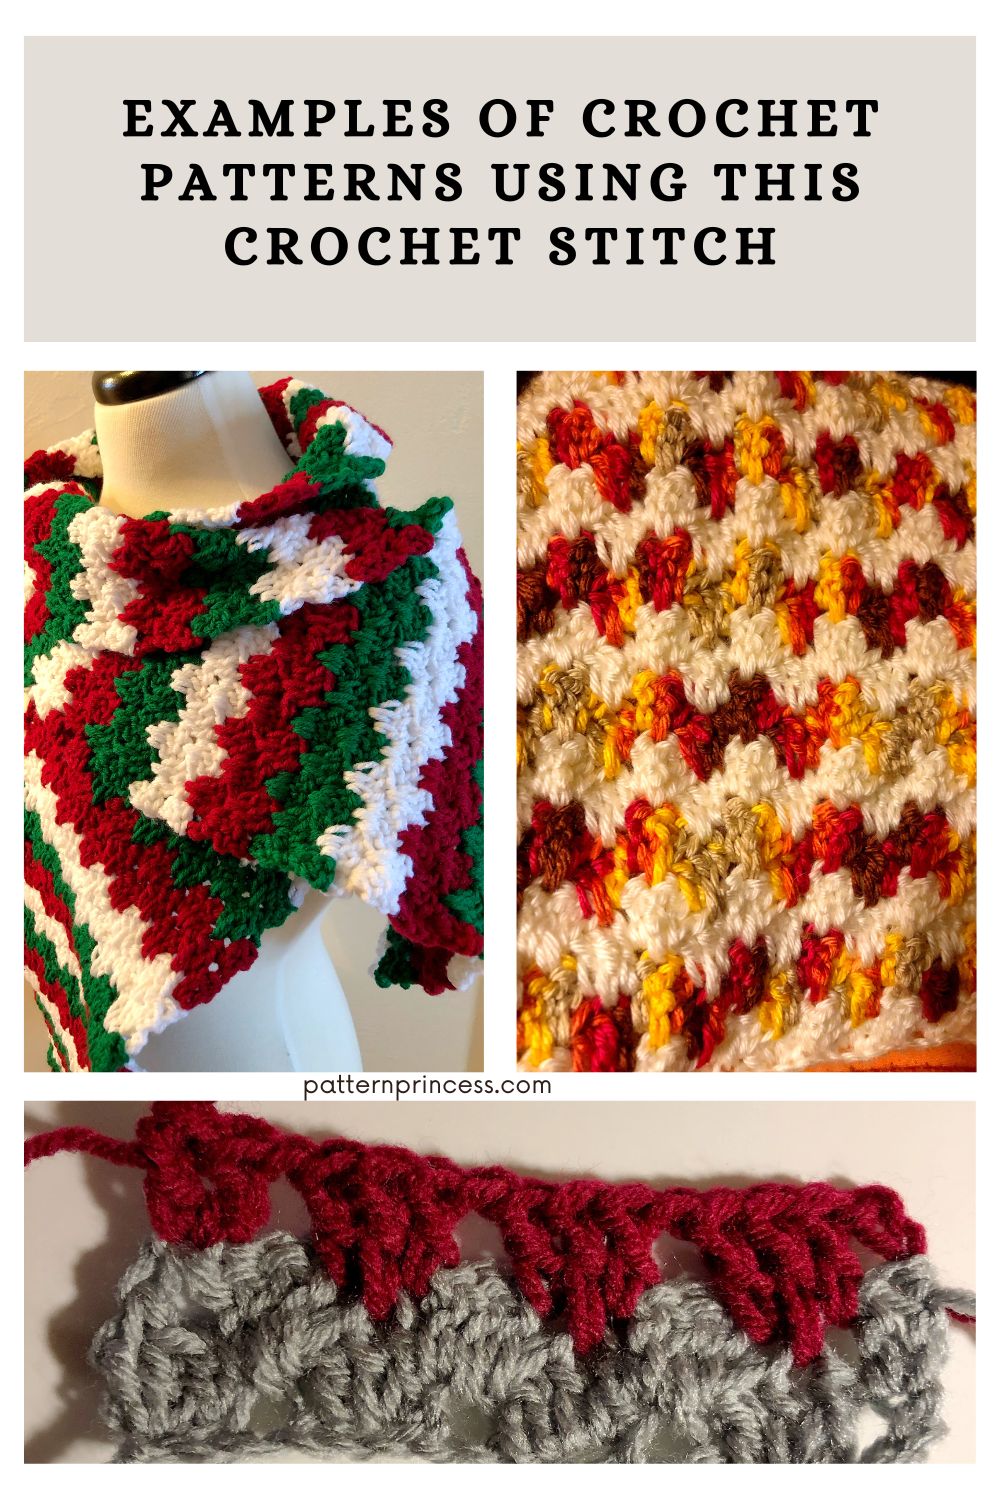 Examples of Crochet Patterns using this Crochet Stitch